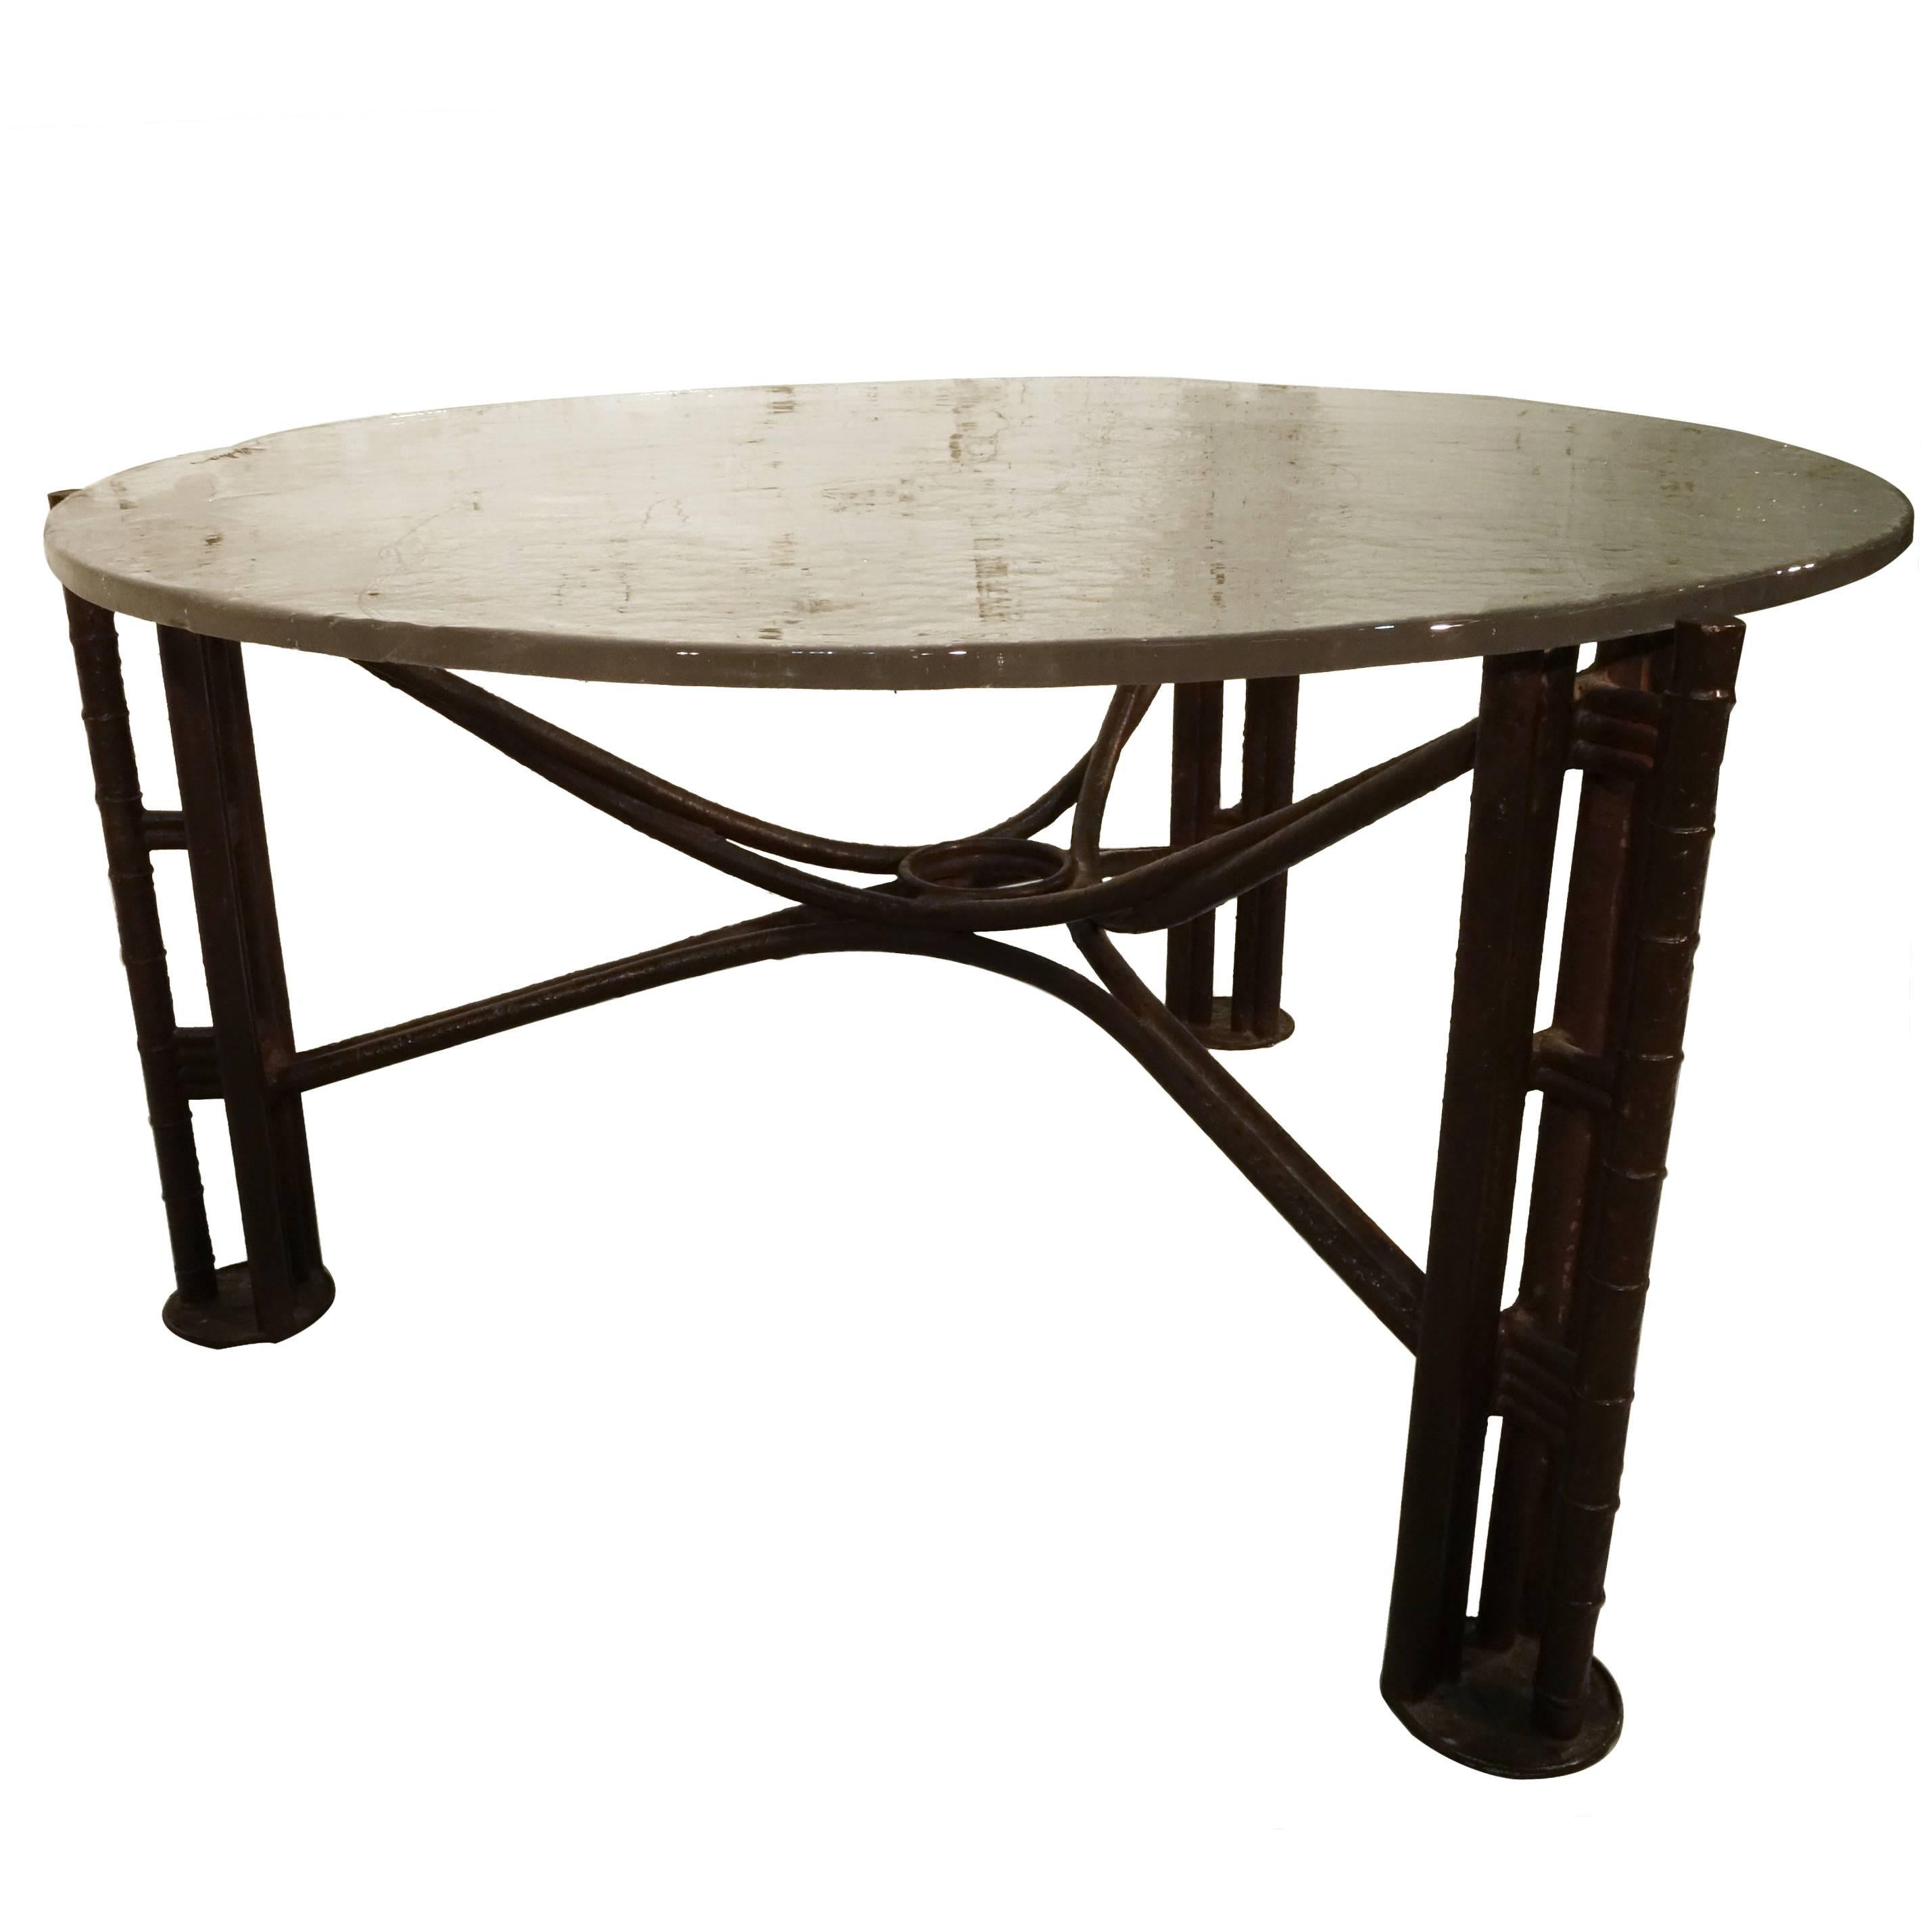 Bronze and Glass Low Table by Lothar Klute